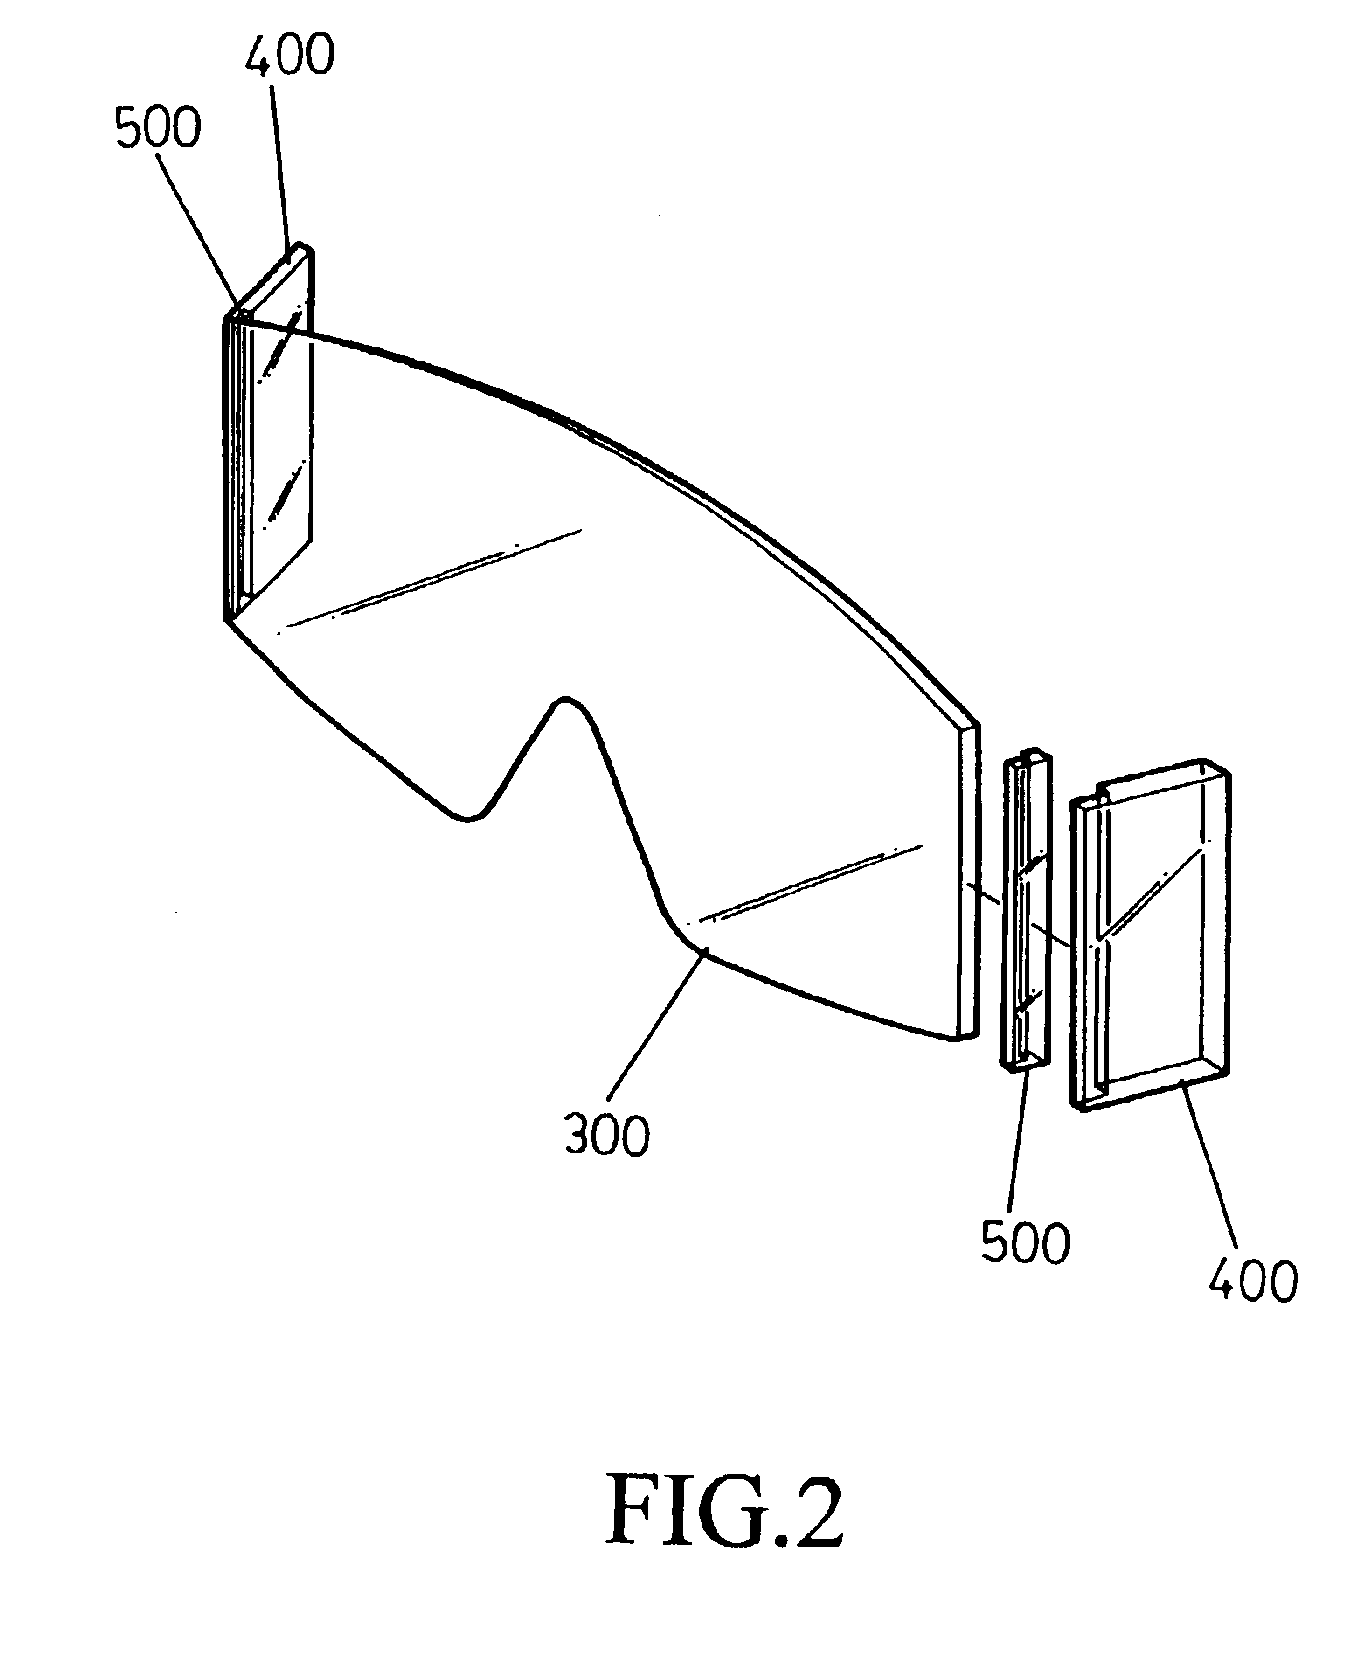 Adhesion of diving goggle lenses